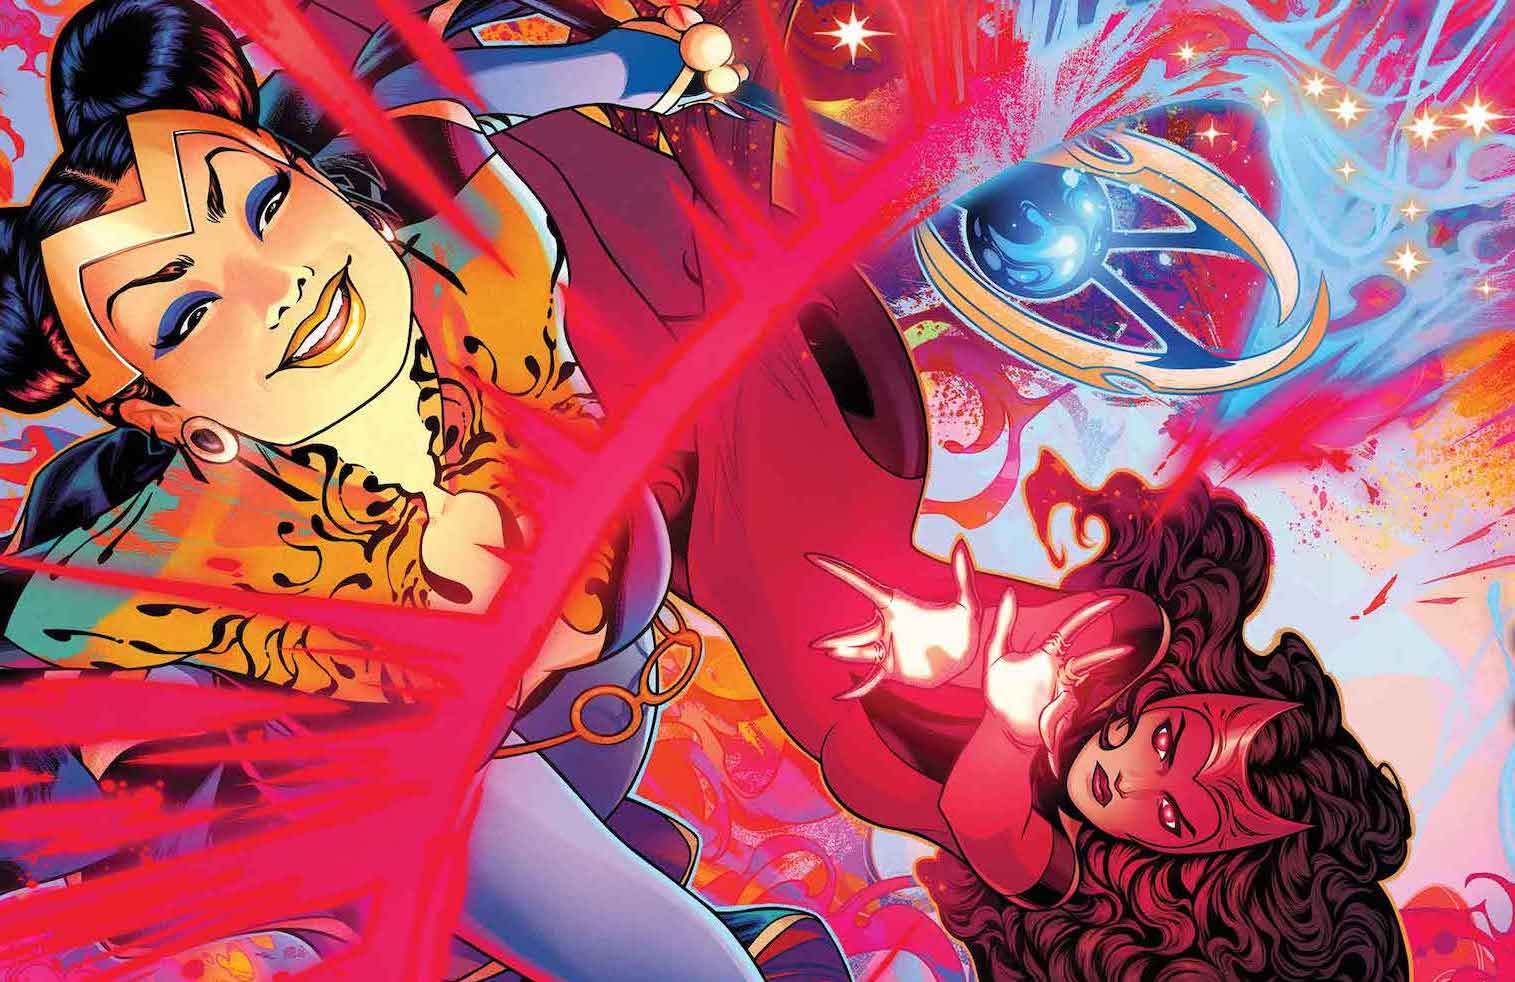 'Scarlet Witch' #10 preview showcases Hexfinder in magic battle